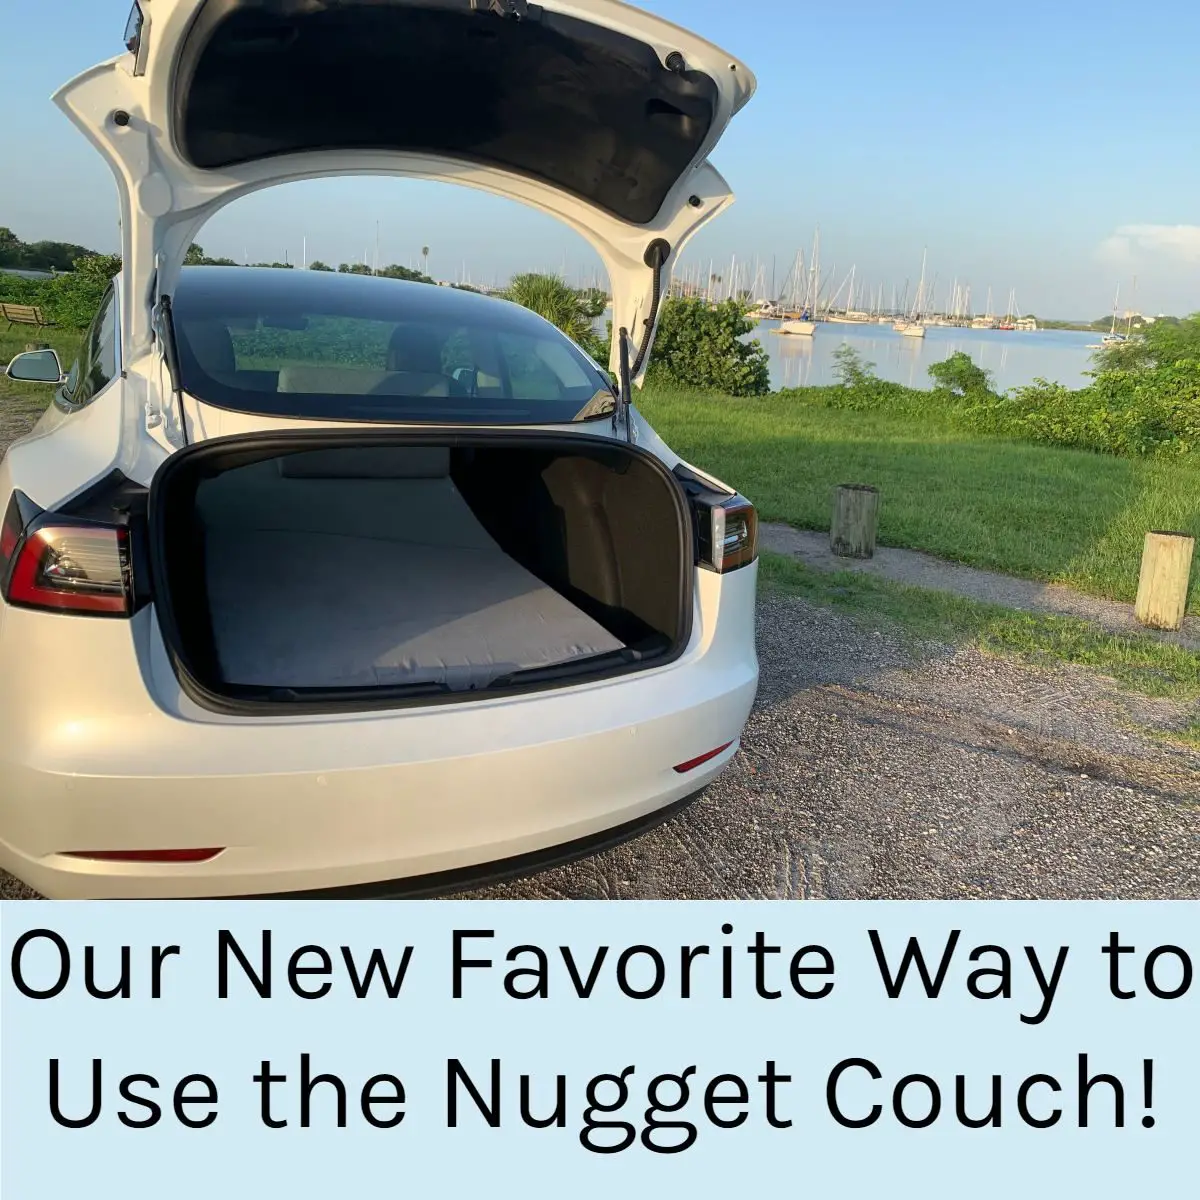 Our New Favorite Way to Use the Nugget Couch